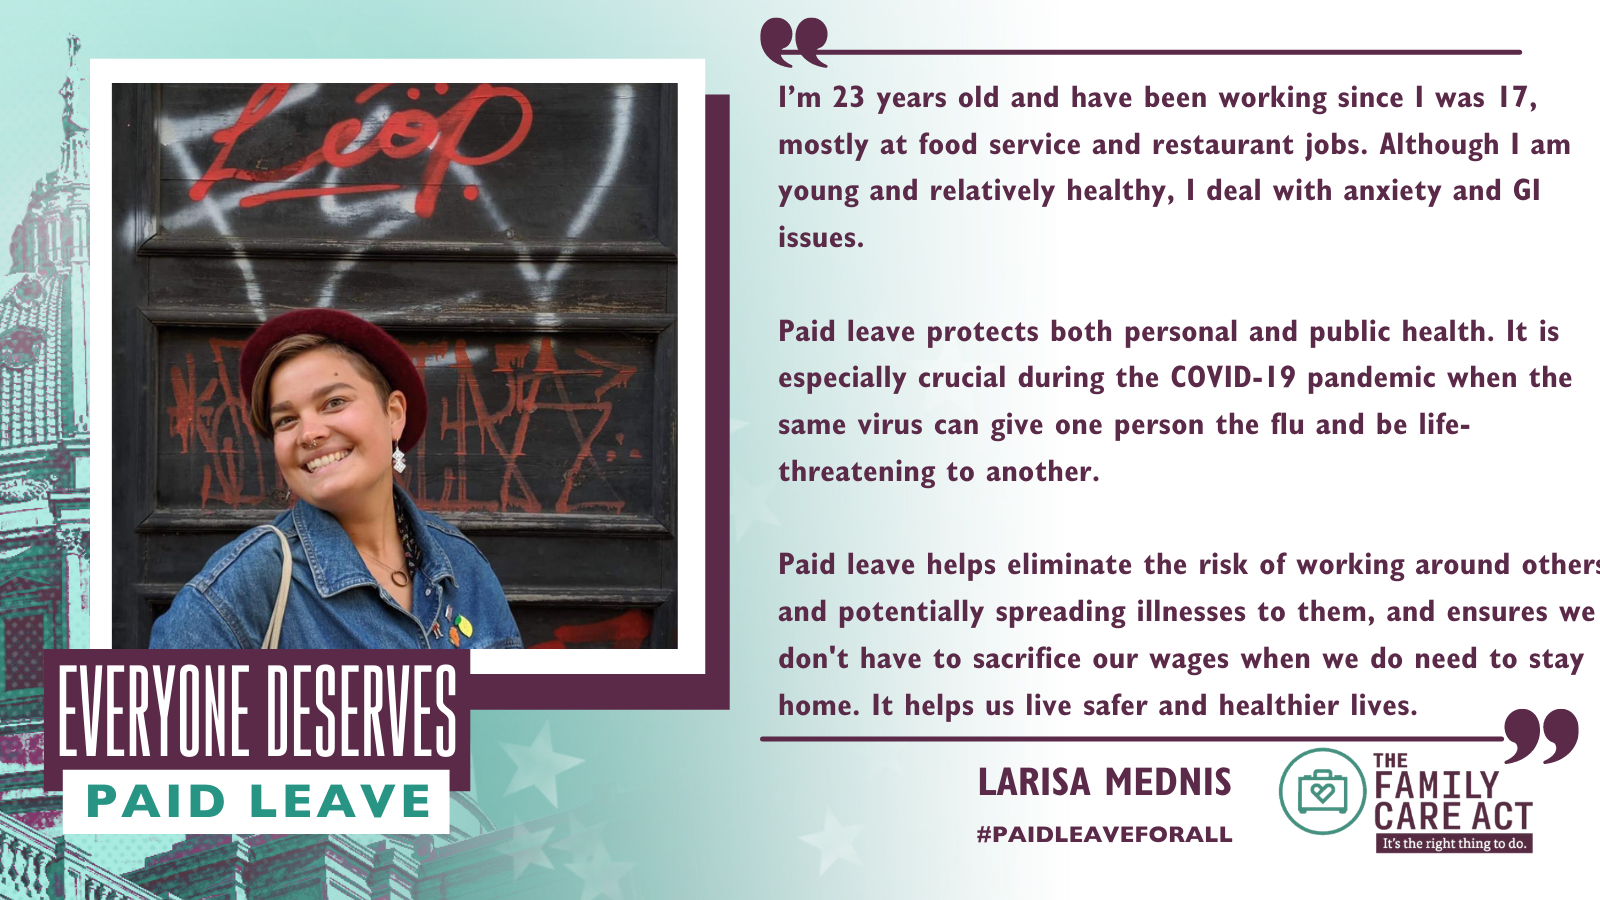 Larisa Mednis Paid Leave Story Formatted for Twitter.png